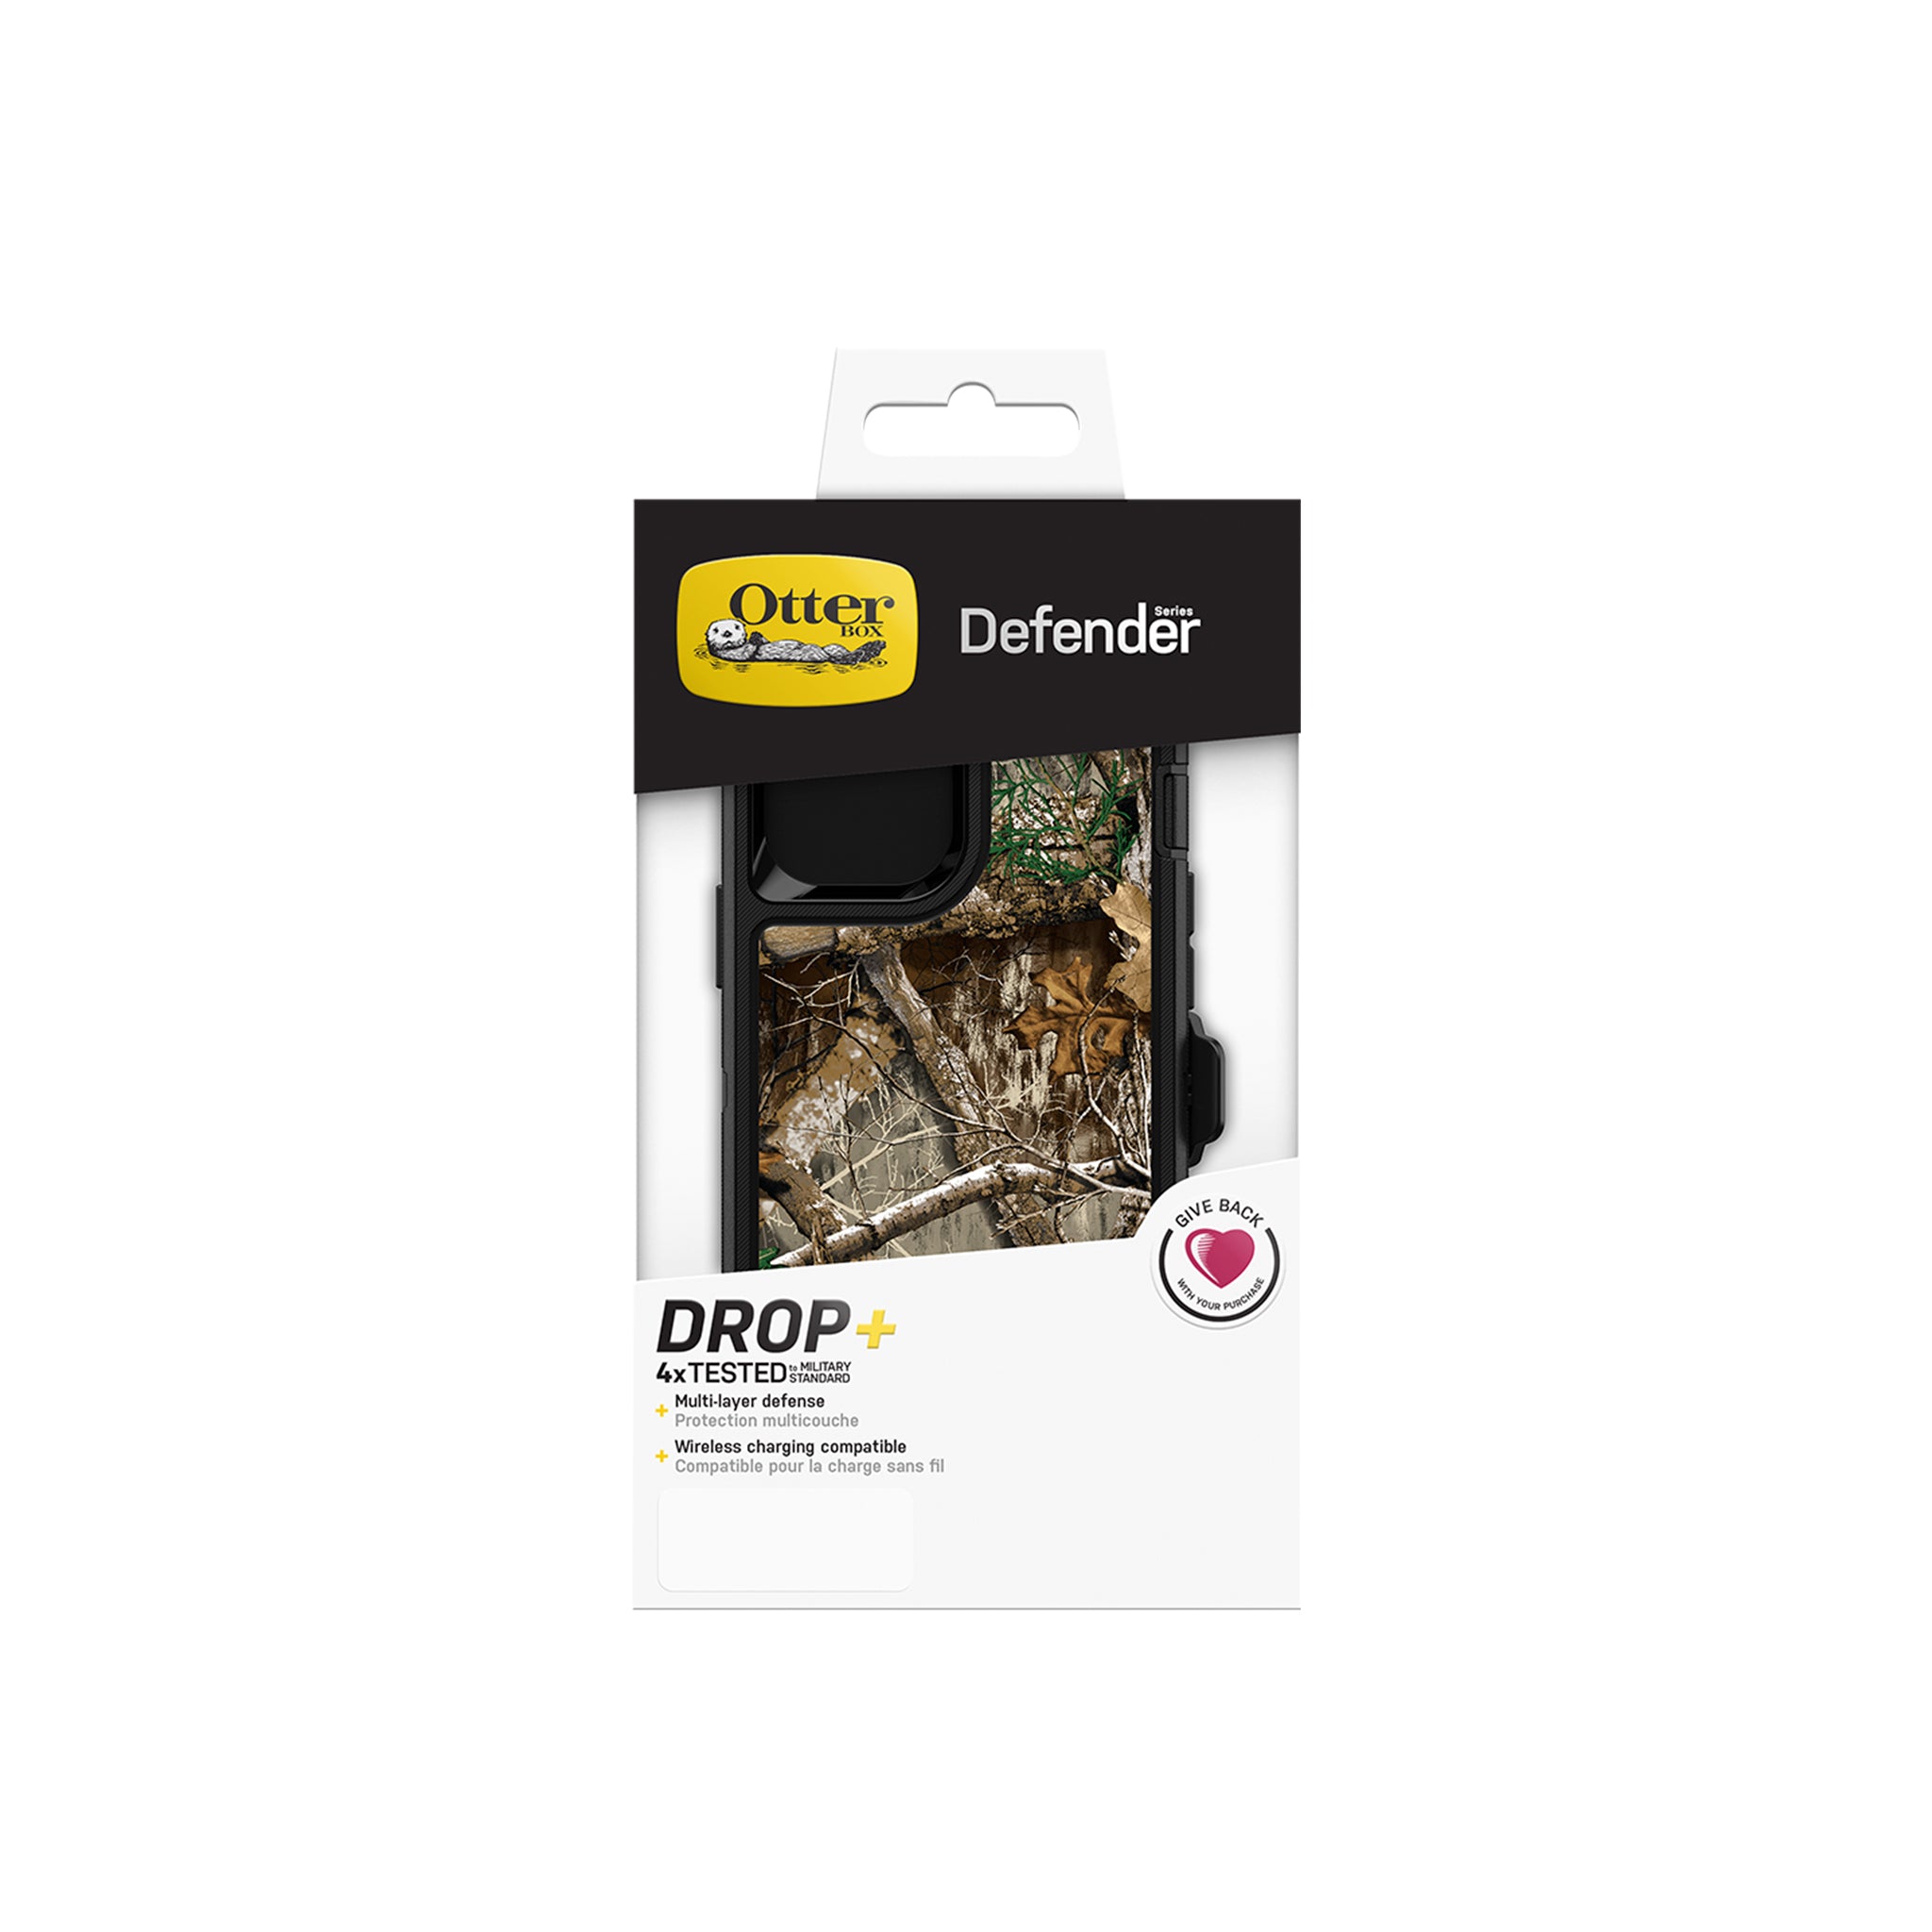 OtterBox - Defender for iPhone 12 / 12 Pro - RealTree Edge Black